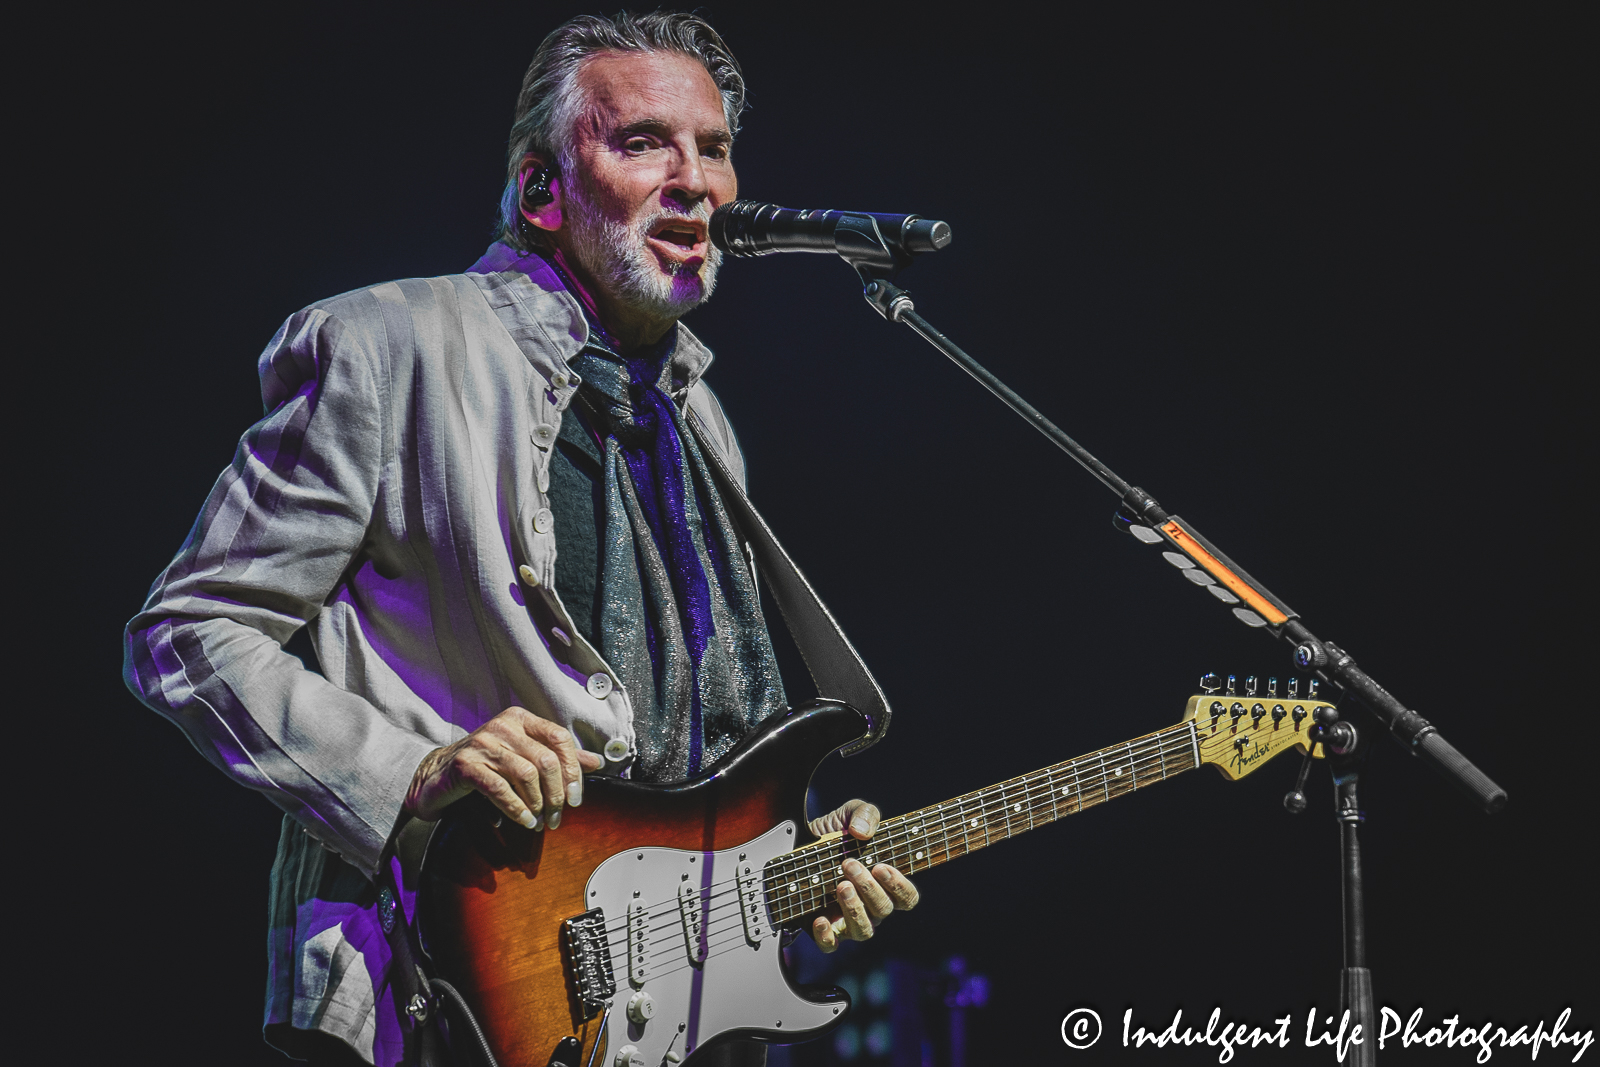 Kenny Loggins opening up his "This Is It!" farewell tour concert at The Family Arena in St. Charles, MO with a performance of "Keep the Fire" on August 17, 2023.